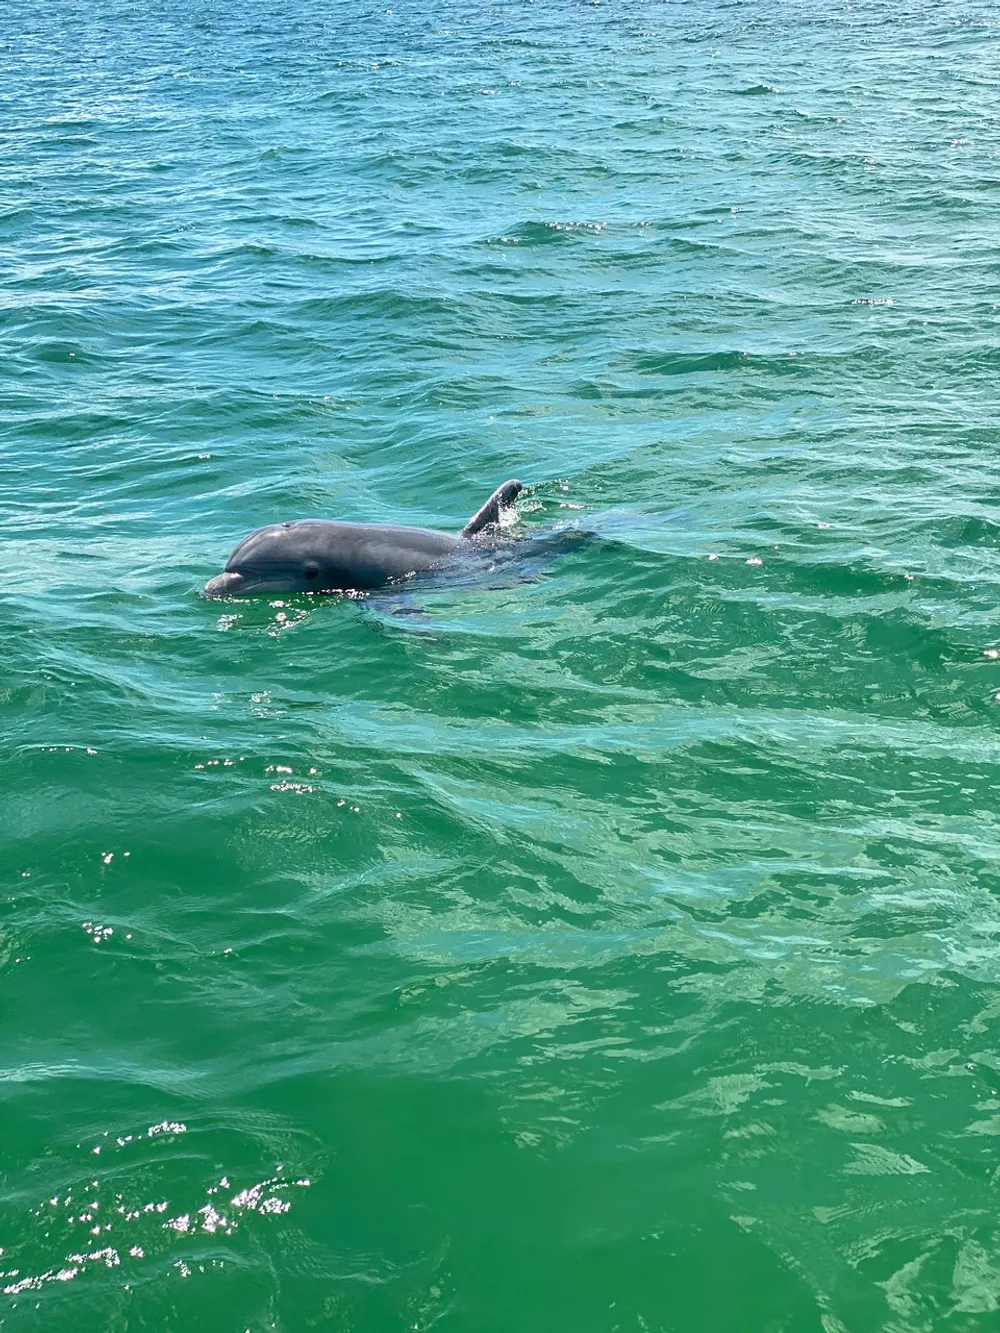 A dolphin is swimming near the surface of the clear emerald waters